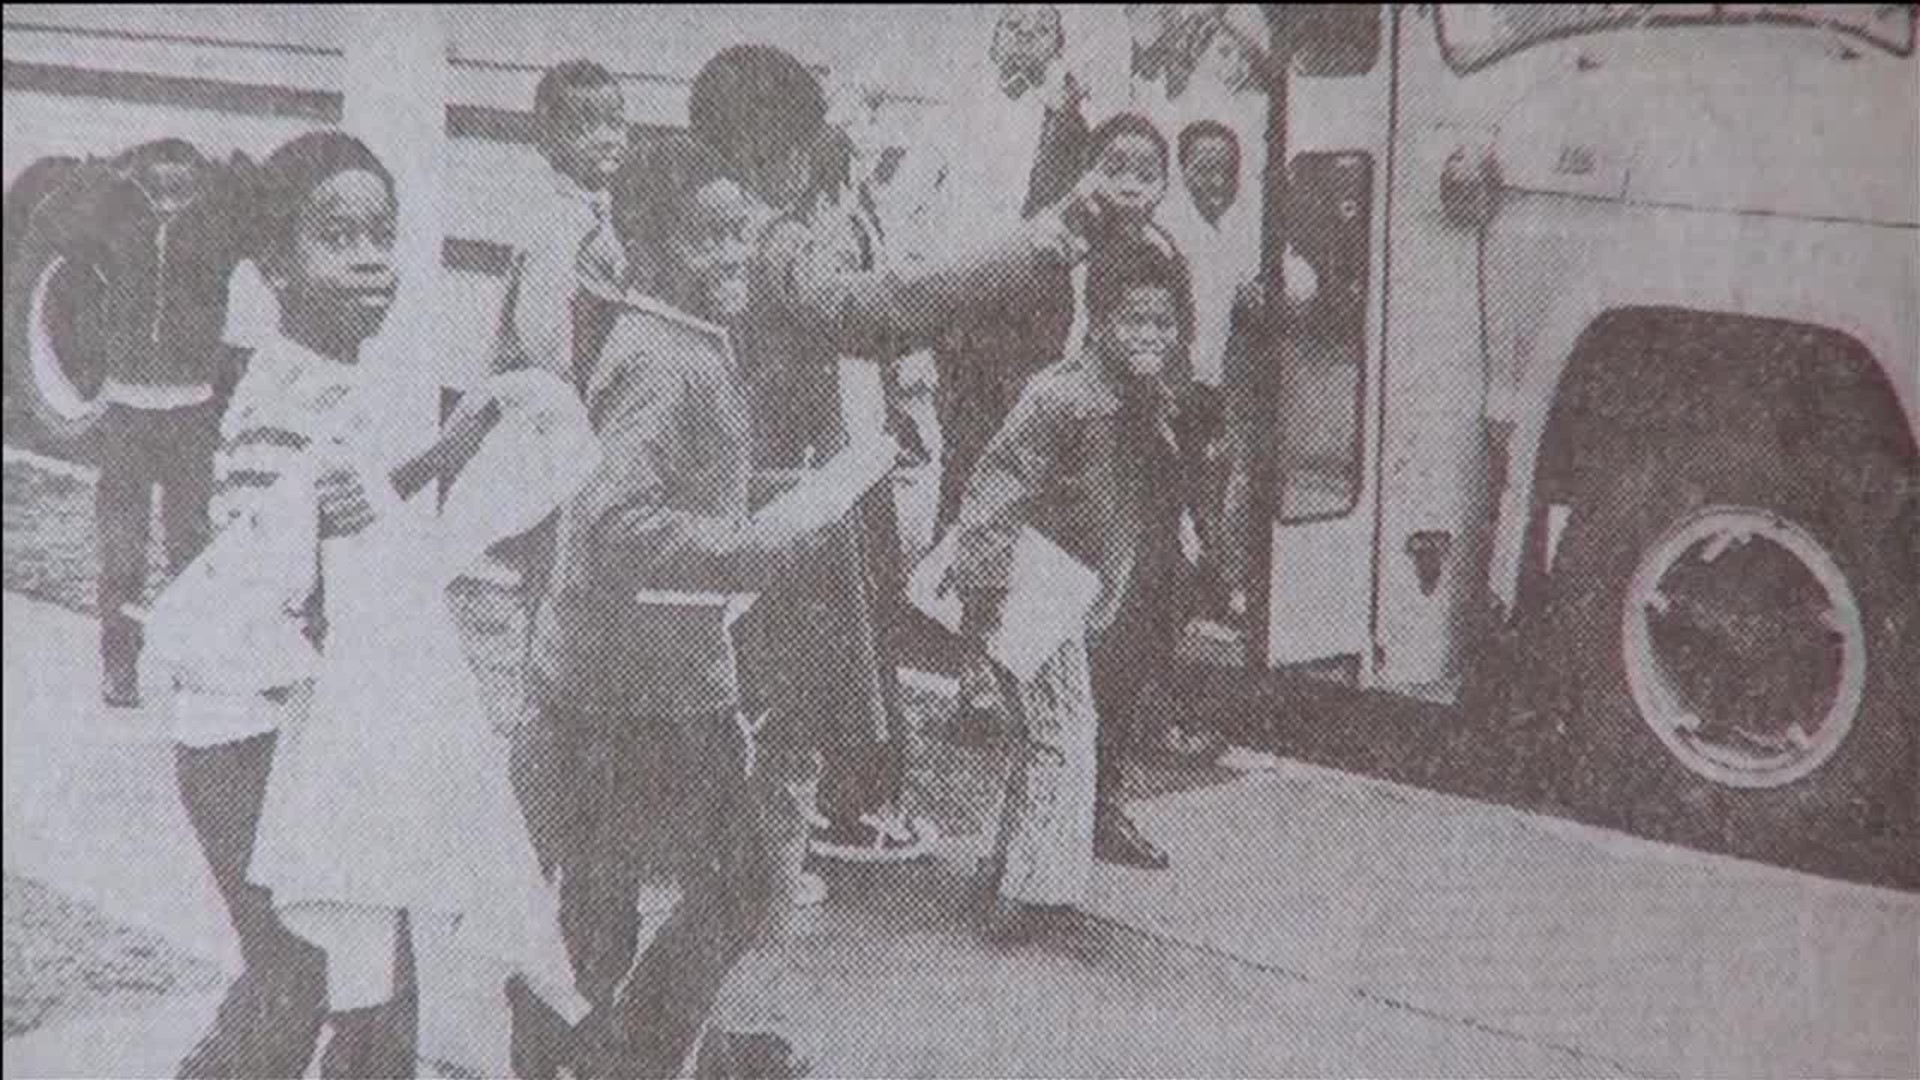 The history of school busing and protests in Memphis and how it led to desegregating local schools